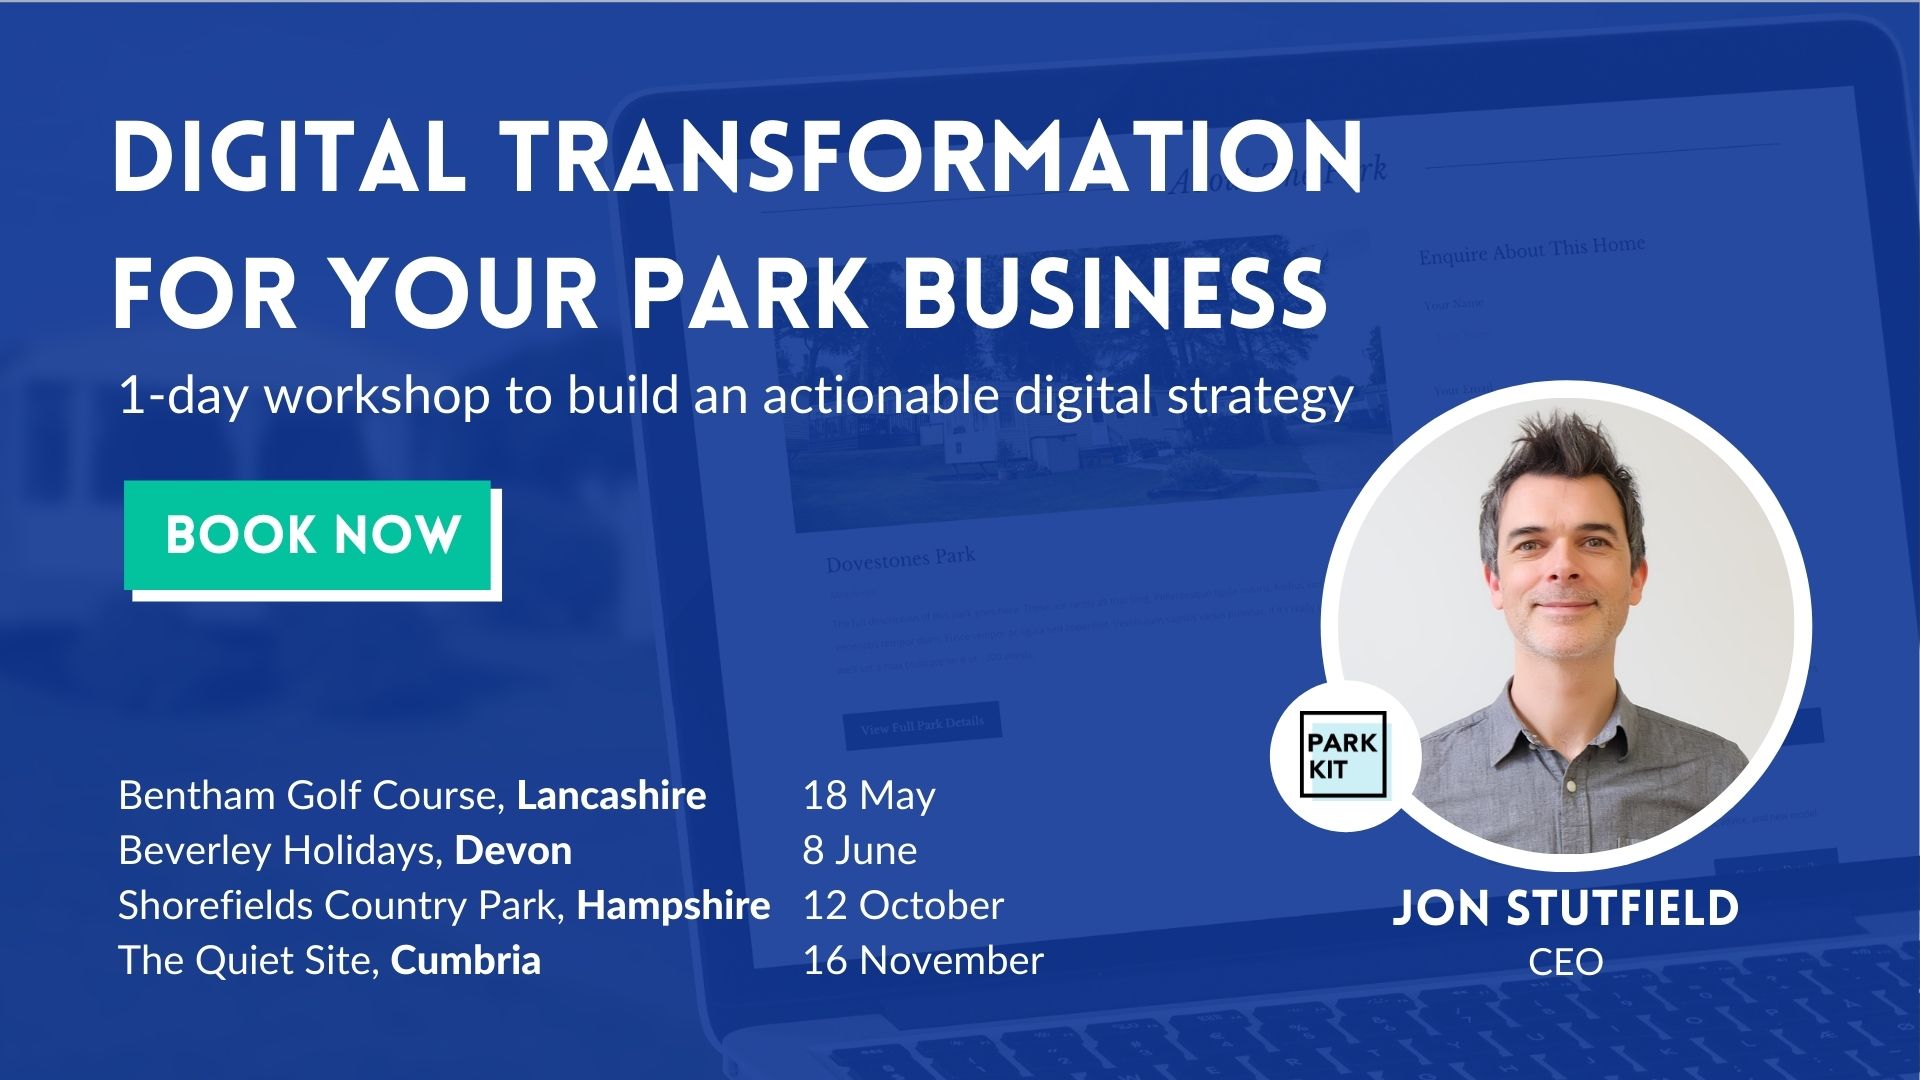 Digital transformation for your park business